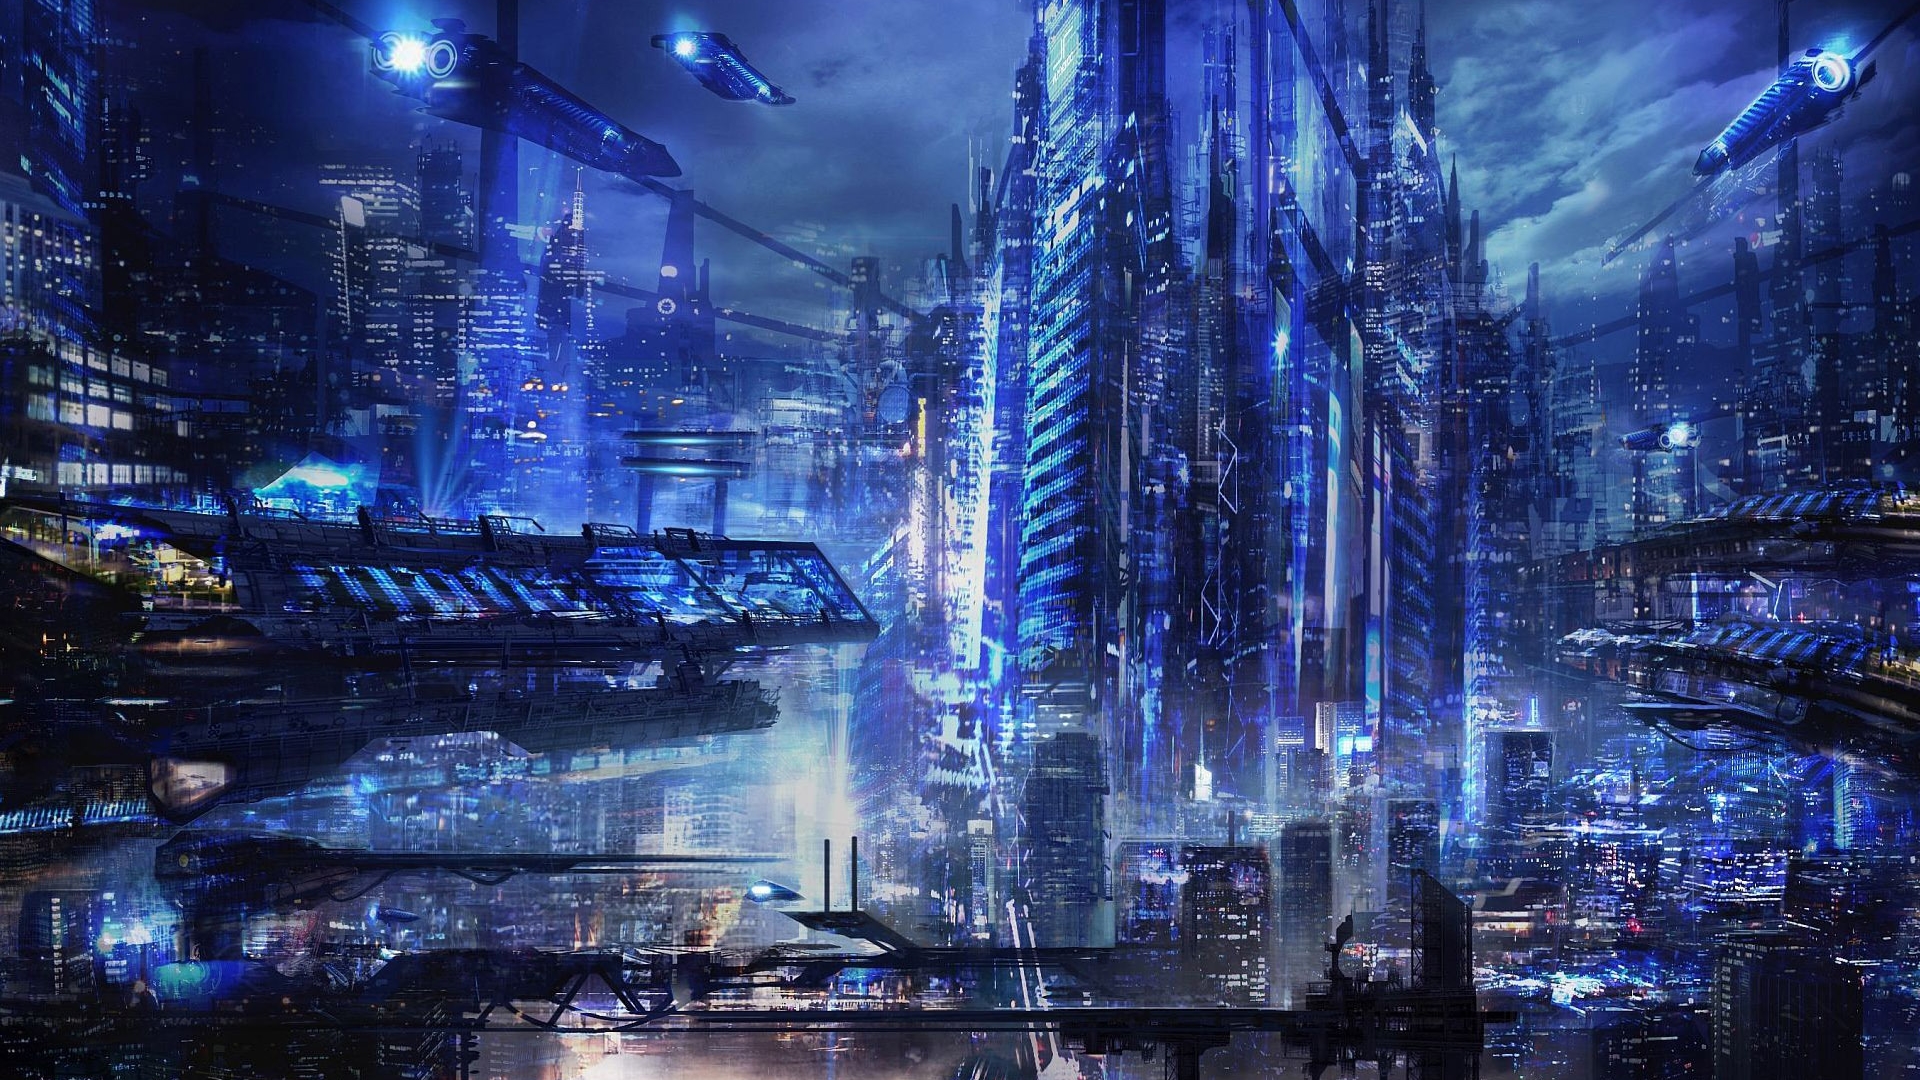 Cyberpunk wallpapers for desktop, download free Cyberpunk pictures and  backgrounds for PC